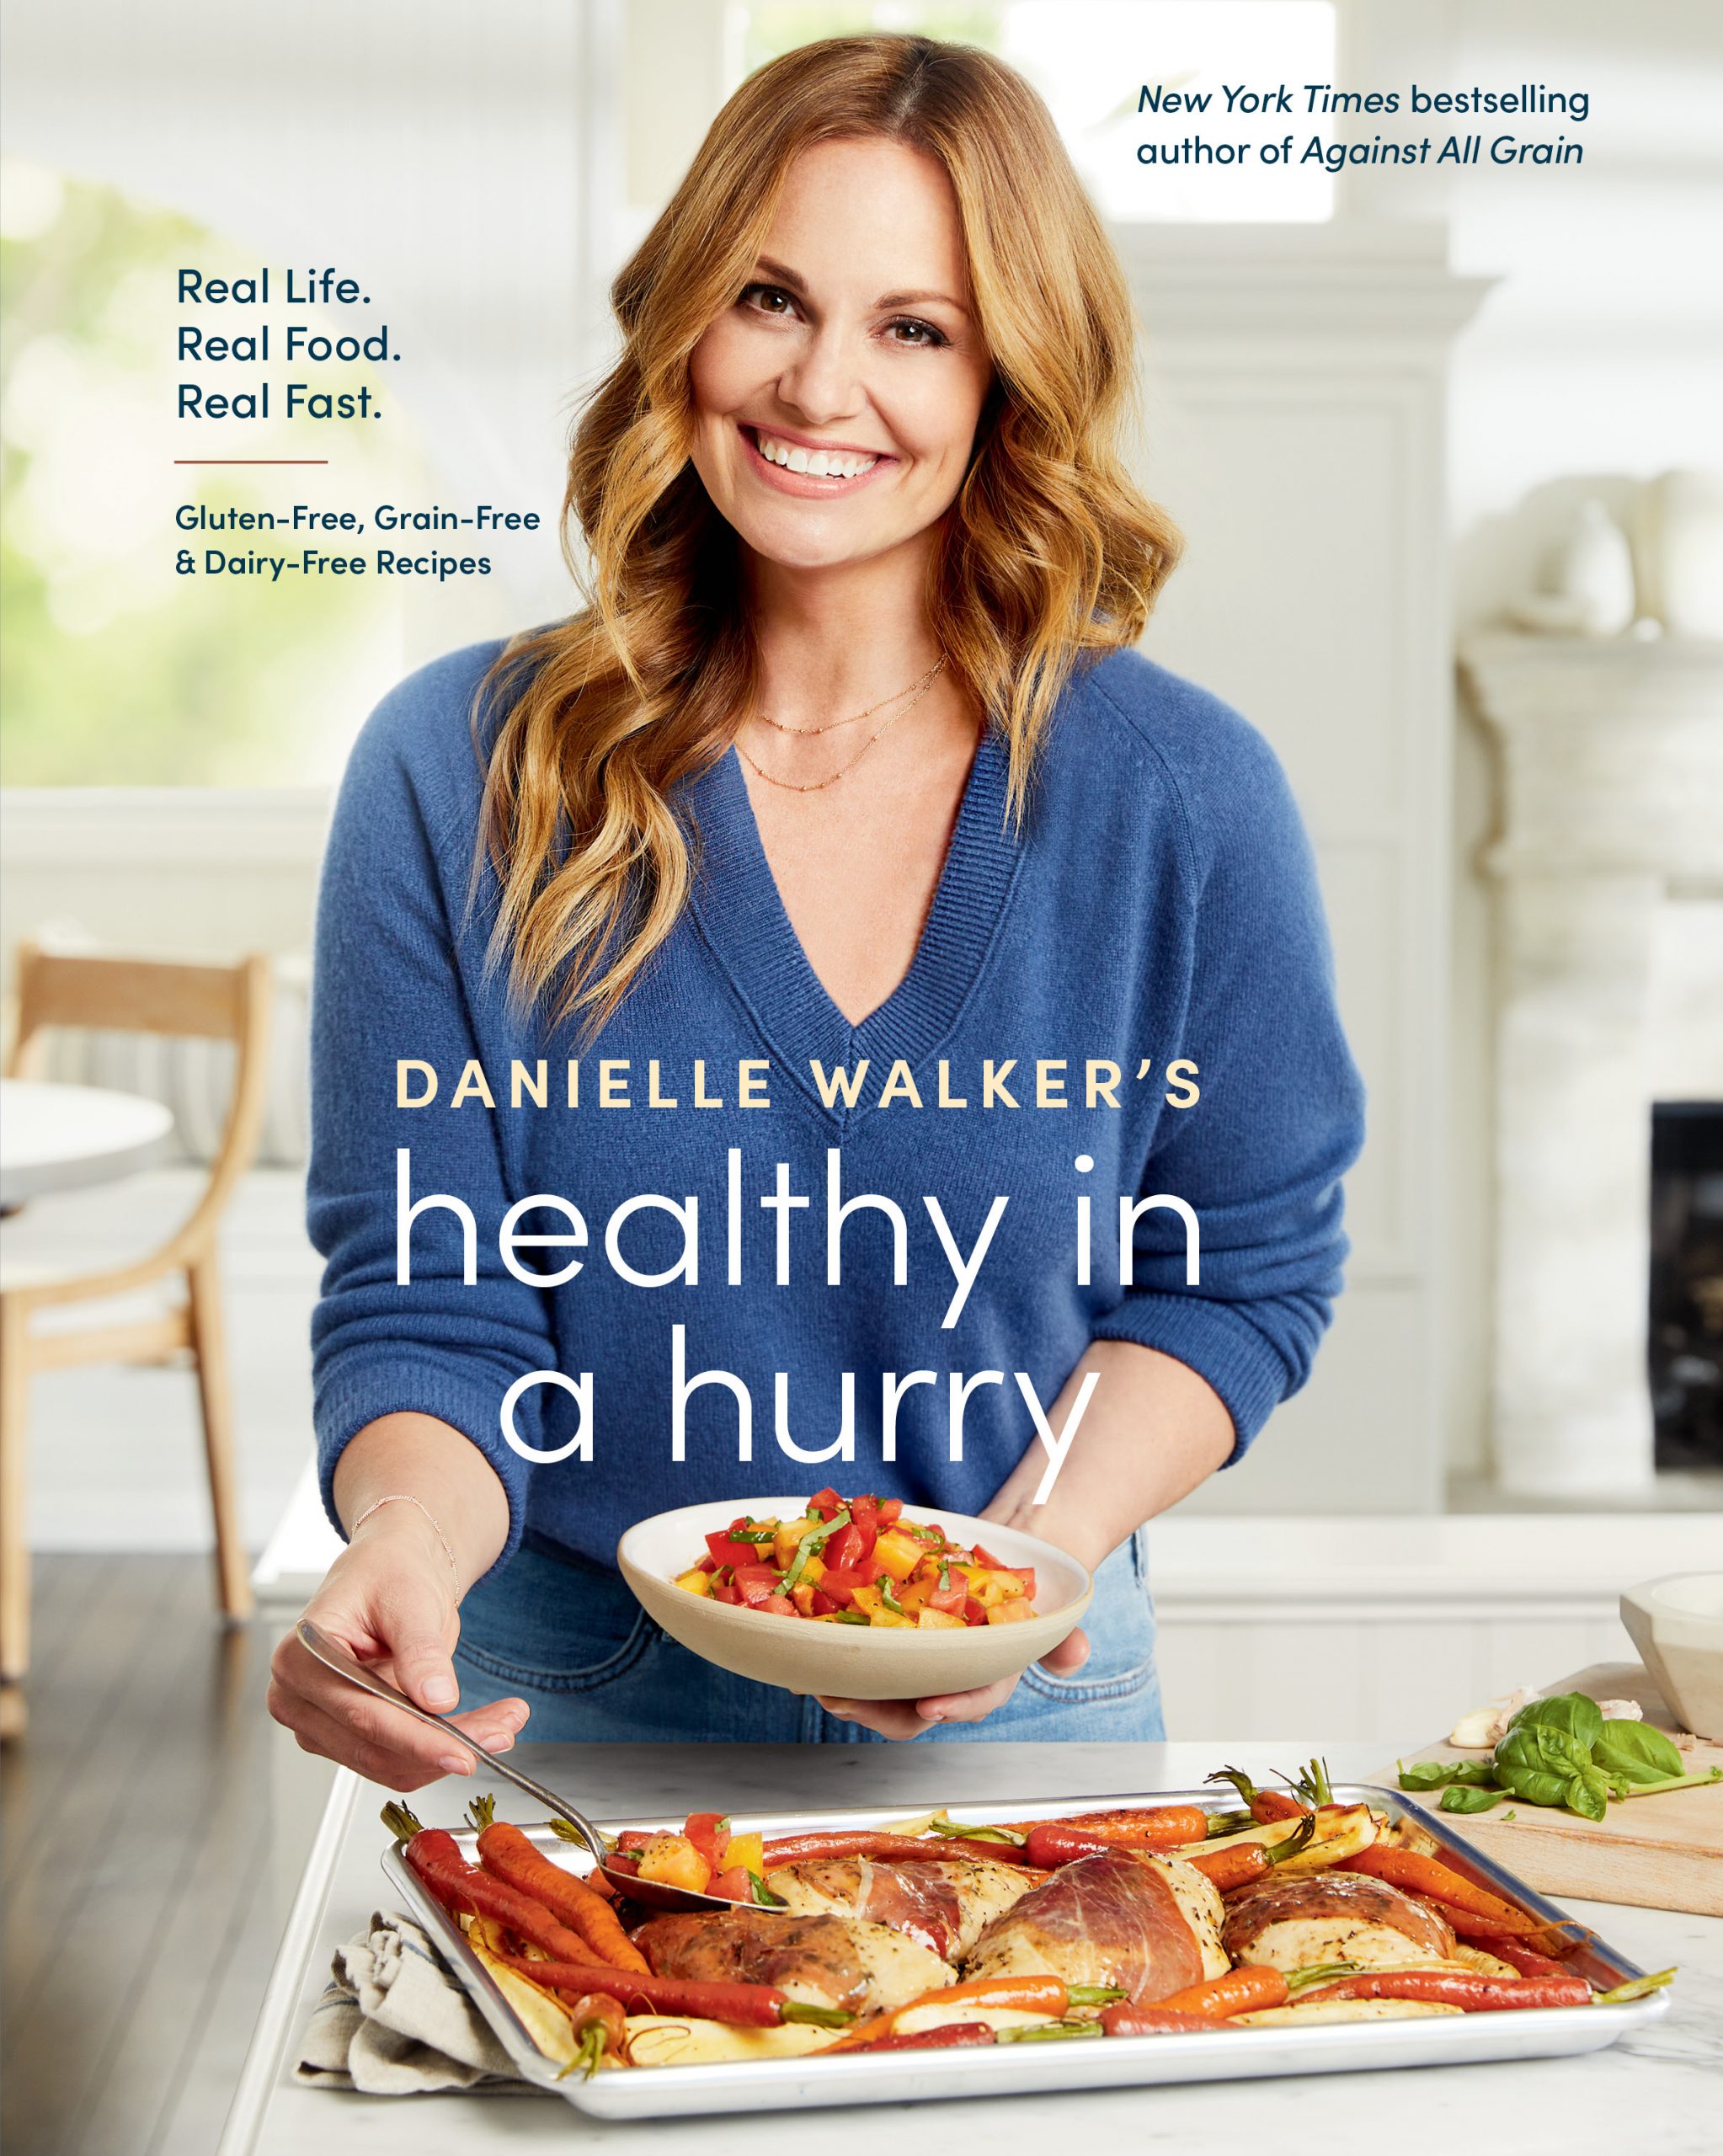 Intuition Month Recipes by Danielle Walker